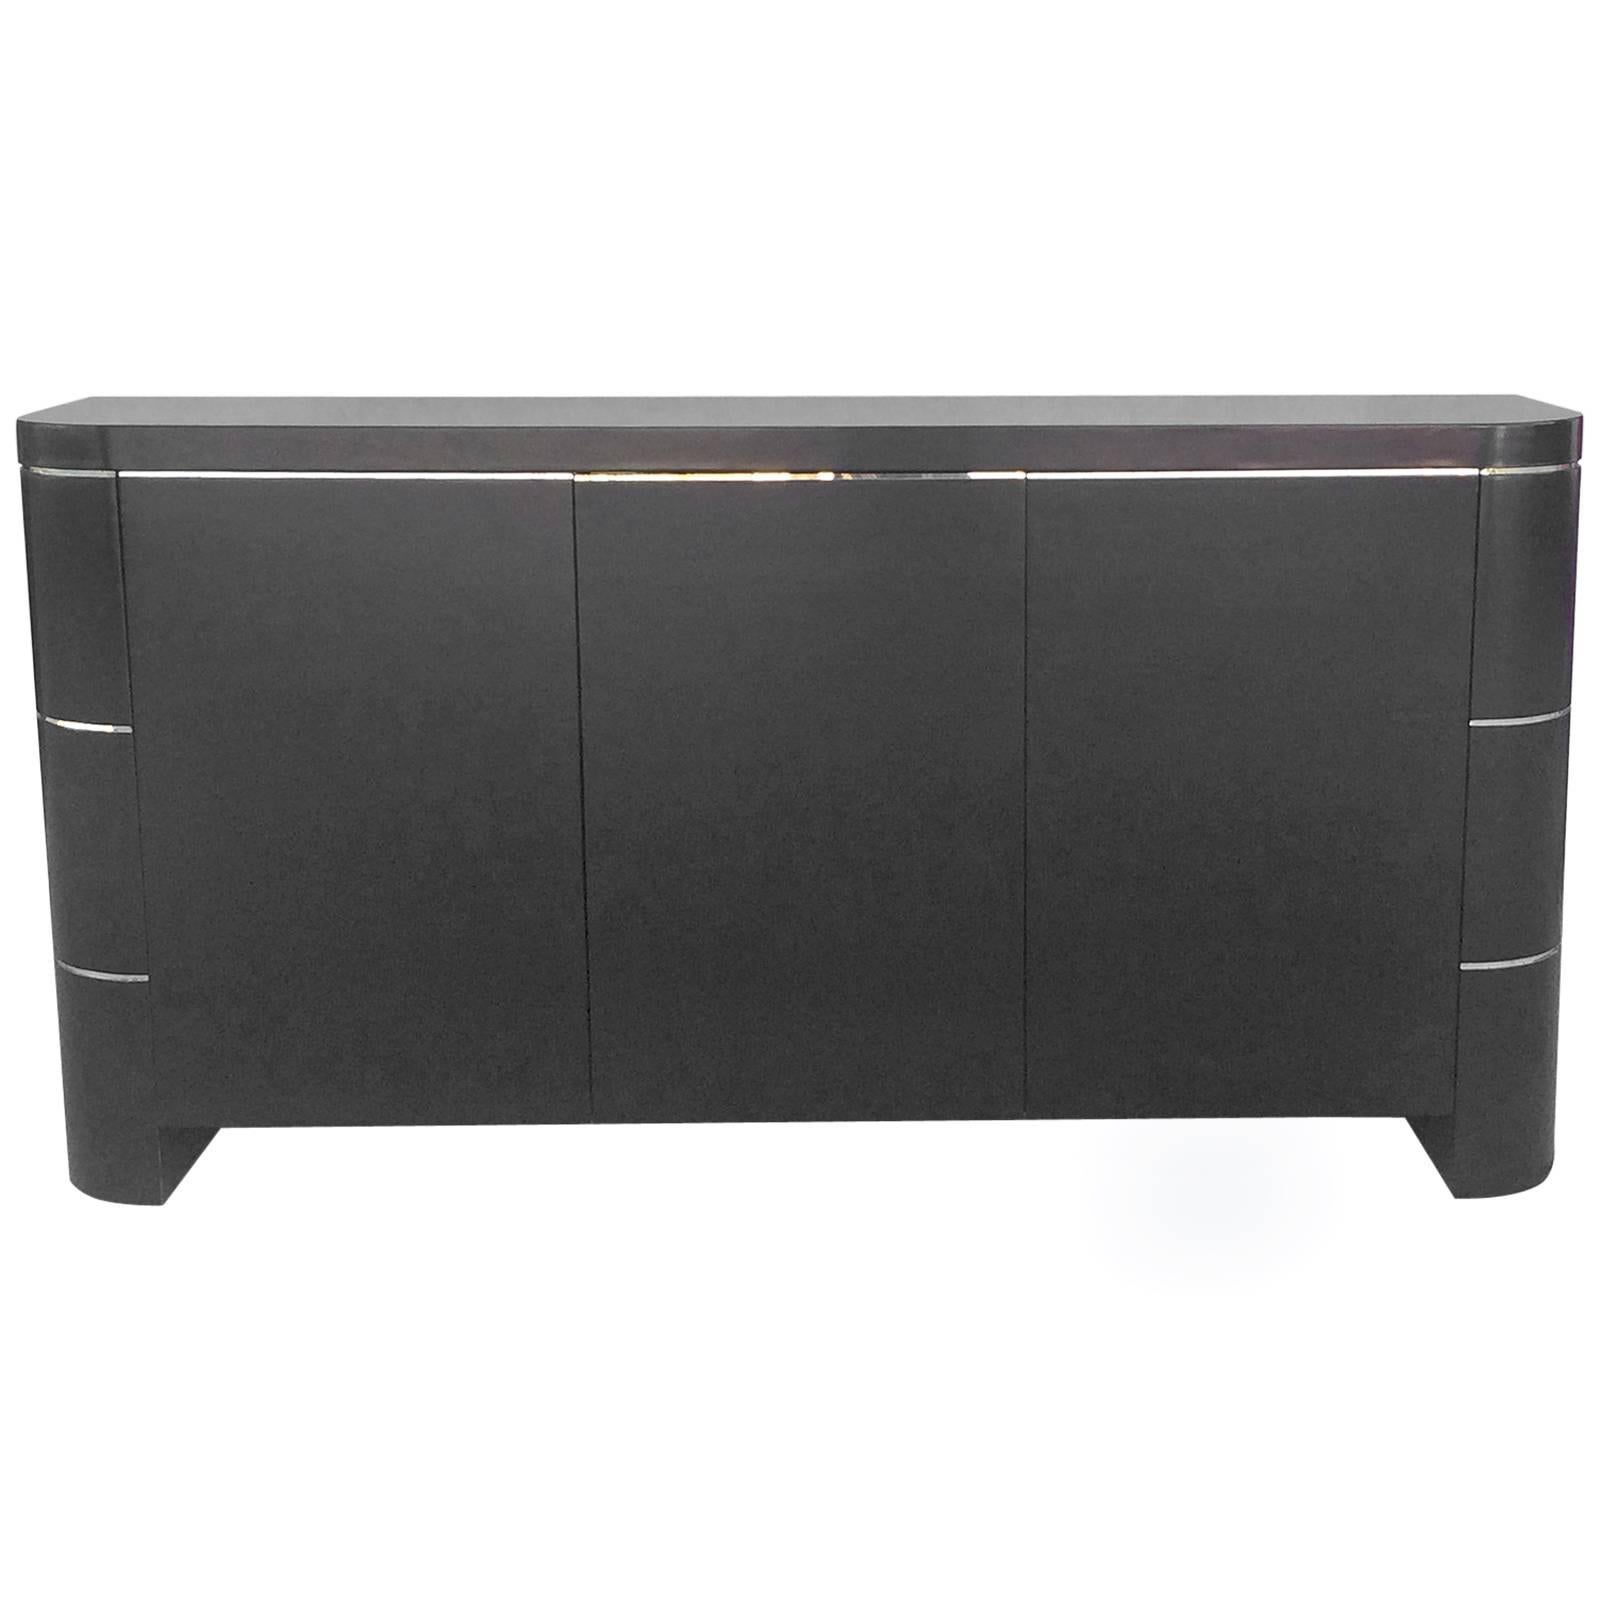 Sophisticated Three Door Credenza in Black Lacquer and Brass Banding